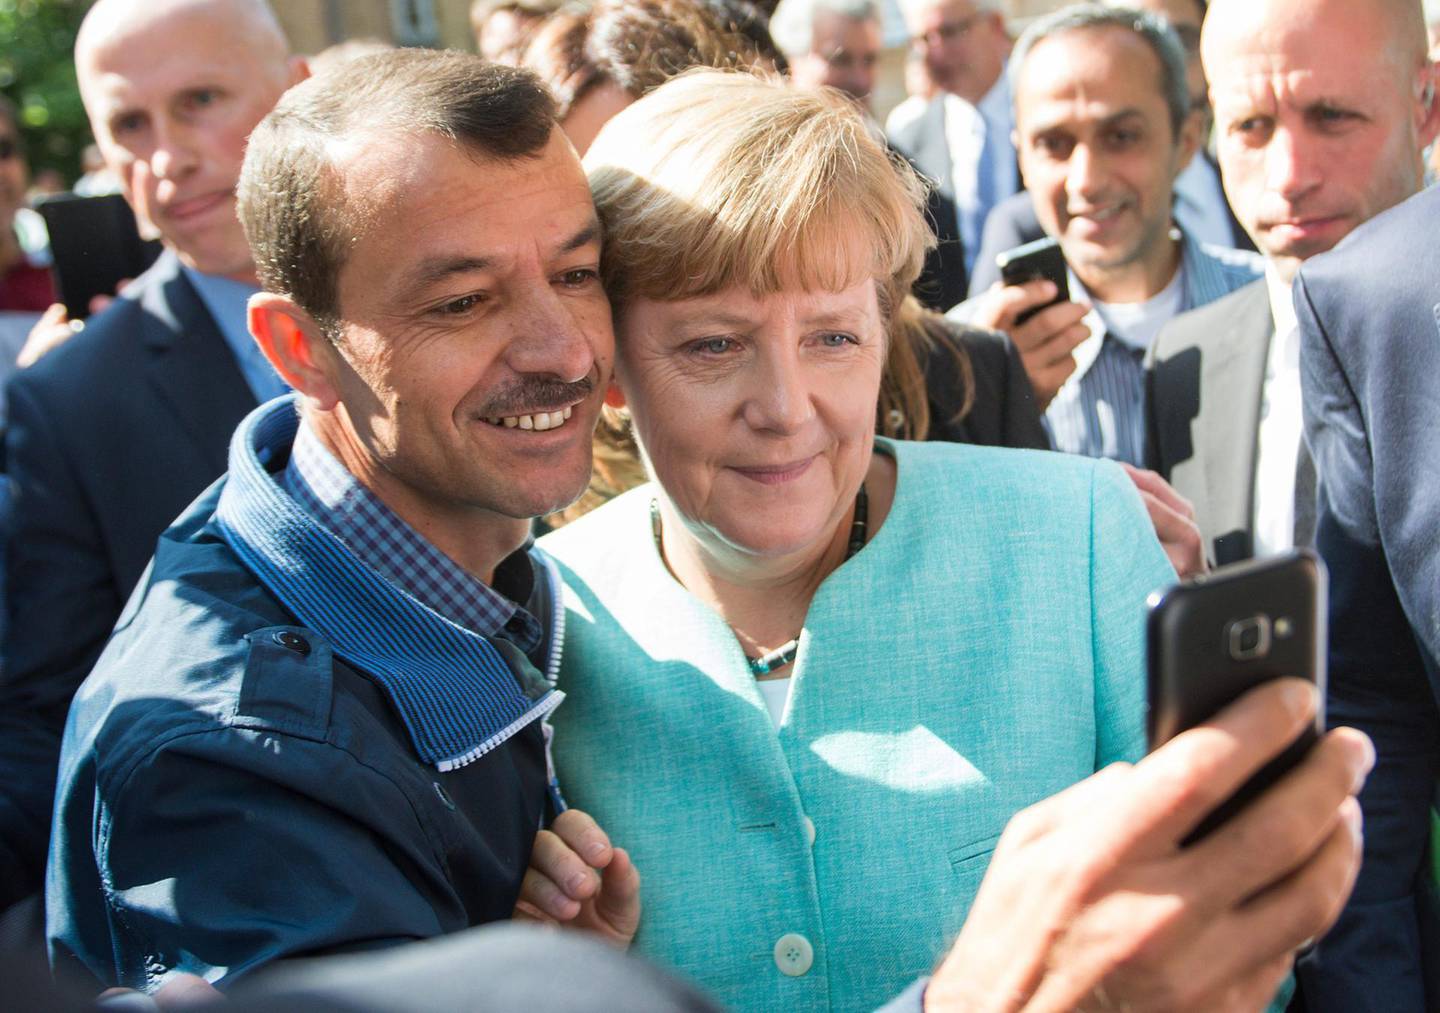 FILEÂ - This Sept. 10, 2015 file photo shows German Chancellor Angela Merkel taking a selfie with a refugee at the refugee reception center in Berlin, Germany. Two years after her controversial decision to open Germanyâ€™s doors to hundreds of thousands of migrants, Merkel is on track to winning her 4th term in national elections this month. (Bernd von Jutrczenka/dpa via AP, file)